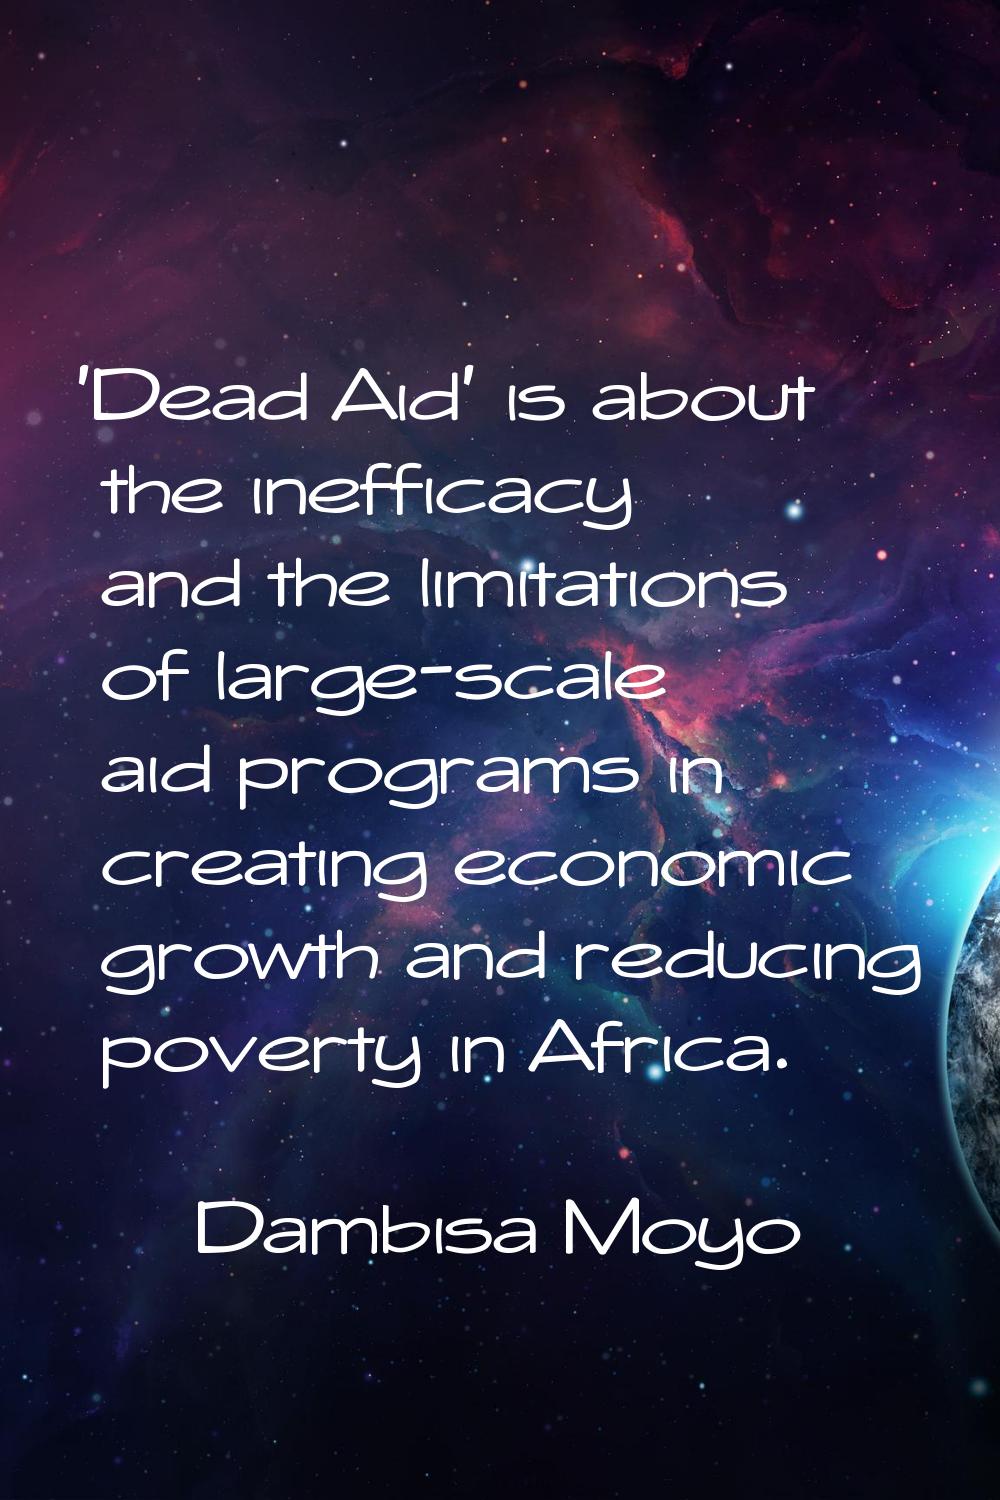 'Dead Aid' is about the inefficacy and the limitations of large-scale aid programs in creating econ